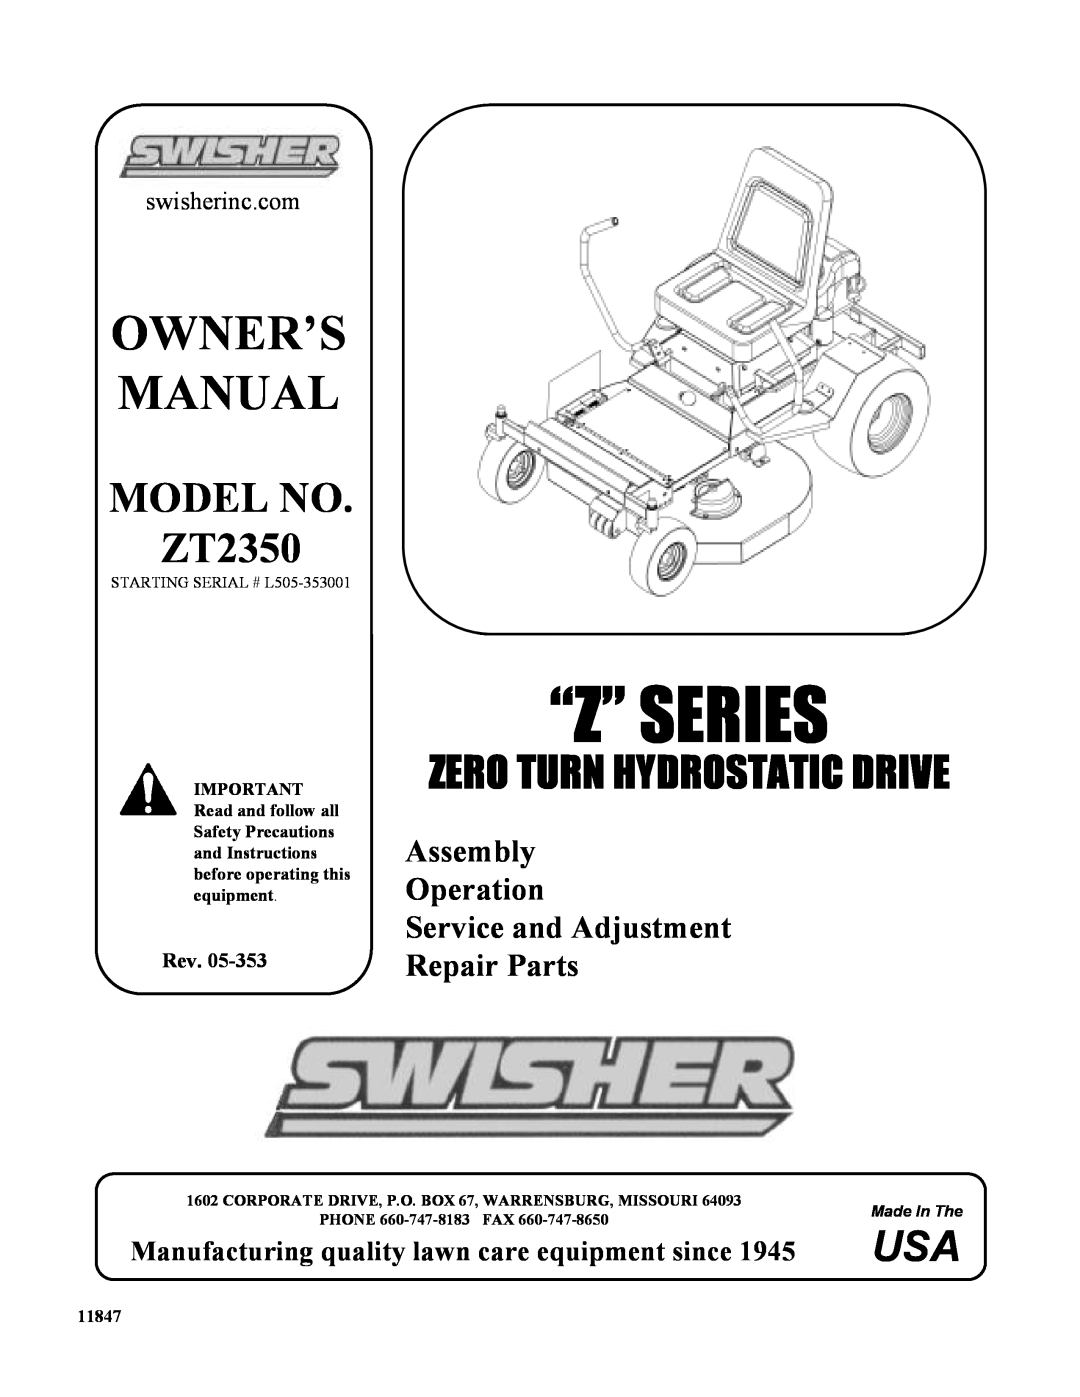 Swisher owner manual “Z”Series, MODEL NO ZT2350, Manufacturing quality lawn care equipment since, swisherinc.com, 11847 